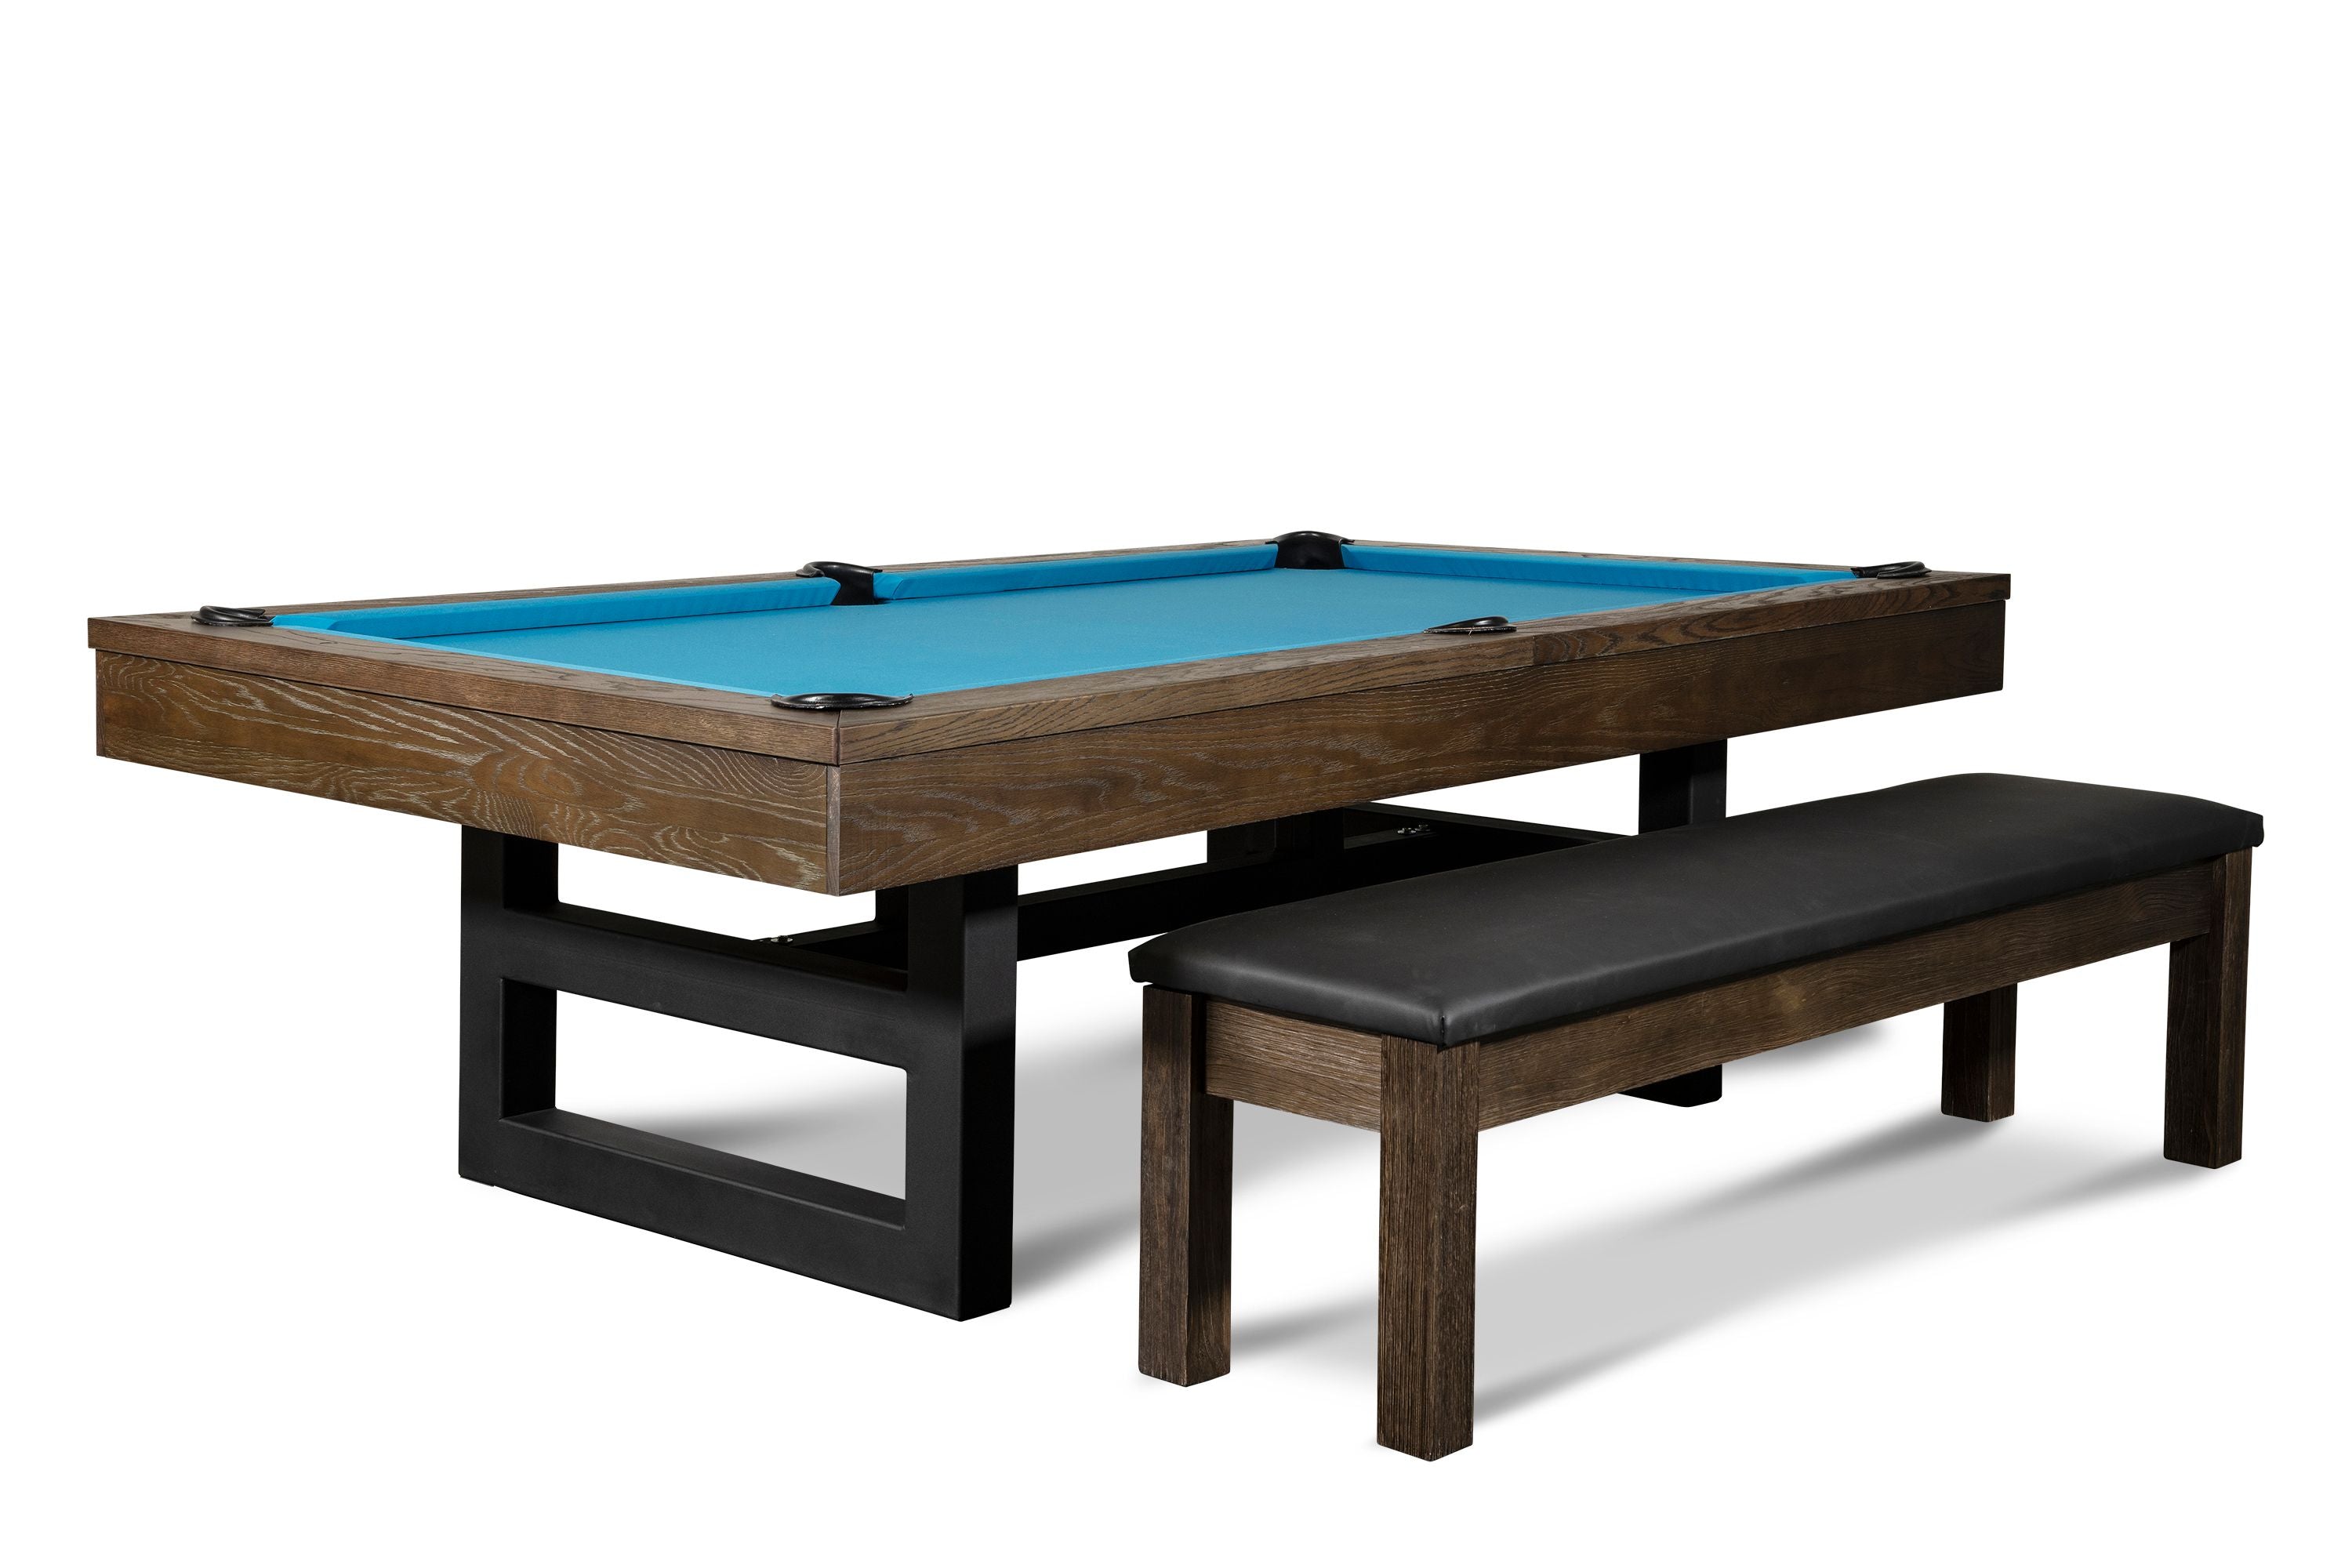 Nixon Billiards Mckay Slate Pool Table ISAF-90070/ISAF-90071 Brown Wash With Matching Chair